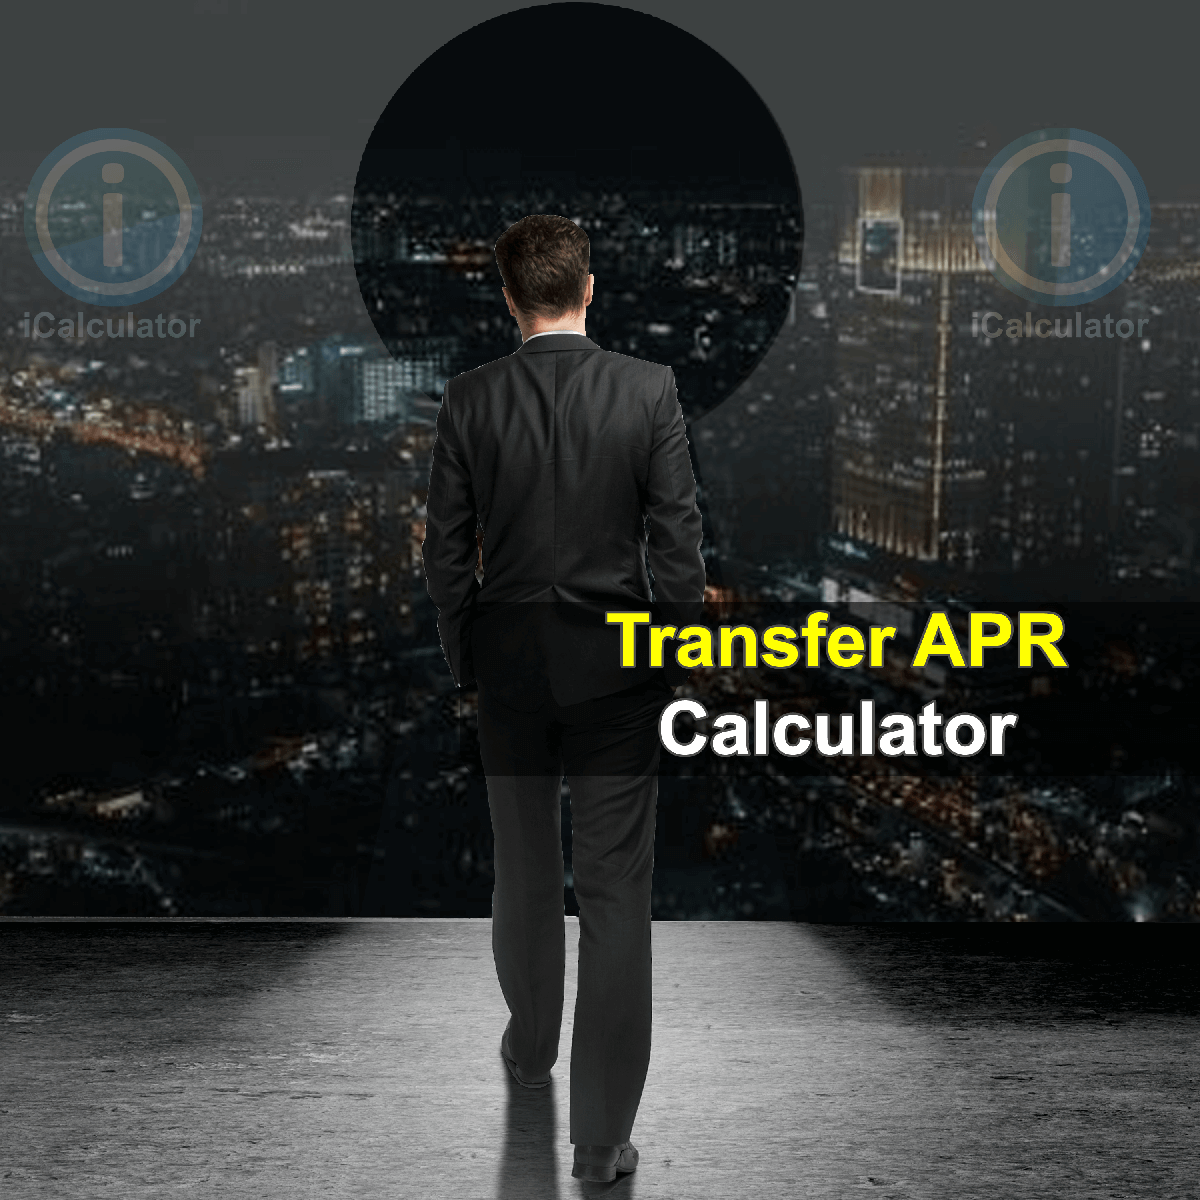 Creditline Transfer APR Calculator. This image provides details of how to calculate amortization using a calculator, pencil and notepad. By using the APR formula, the Creditline Transfer APR Calculator provides a true calculation of the cost of short term loans and overdrafts offered by the banks to their customers and the associated APR of the borrowing